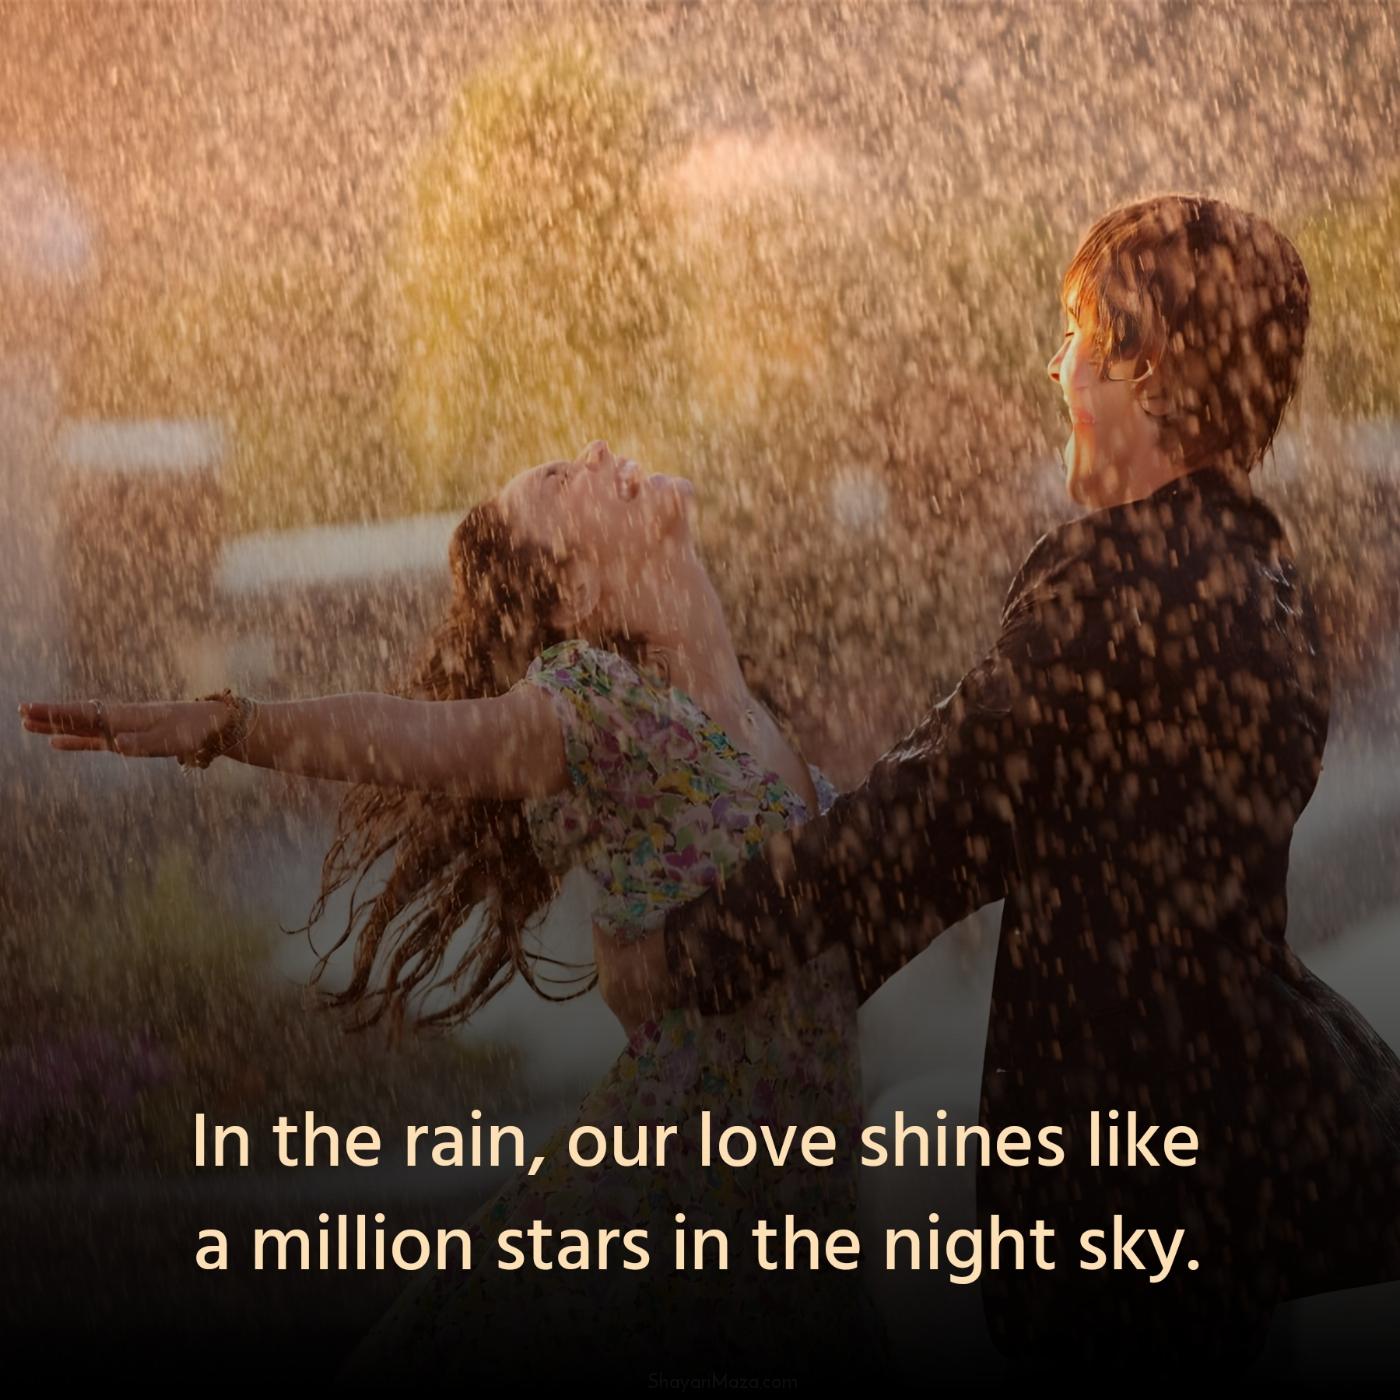 In the rain our love shines like a million stars in the night sky